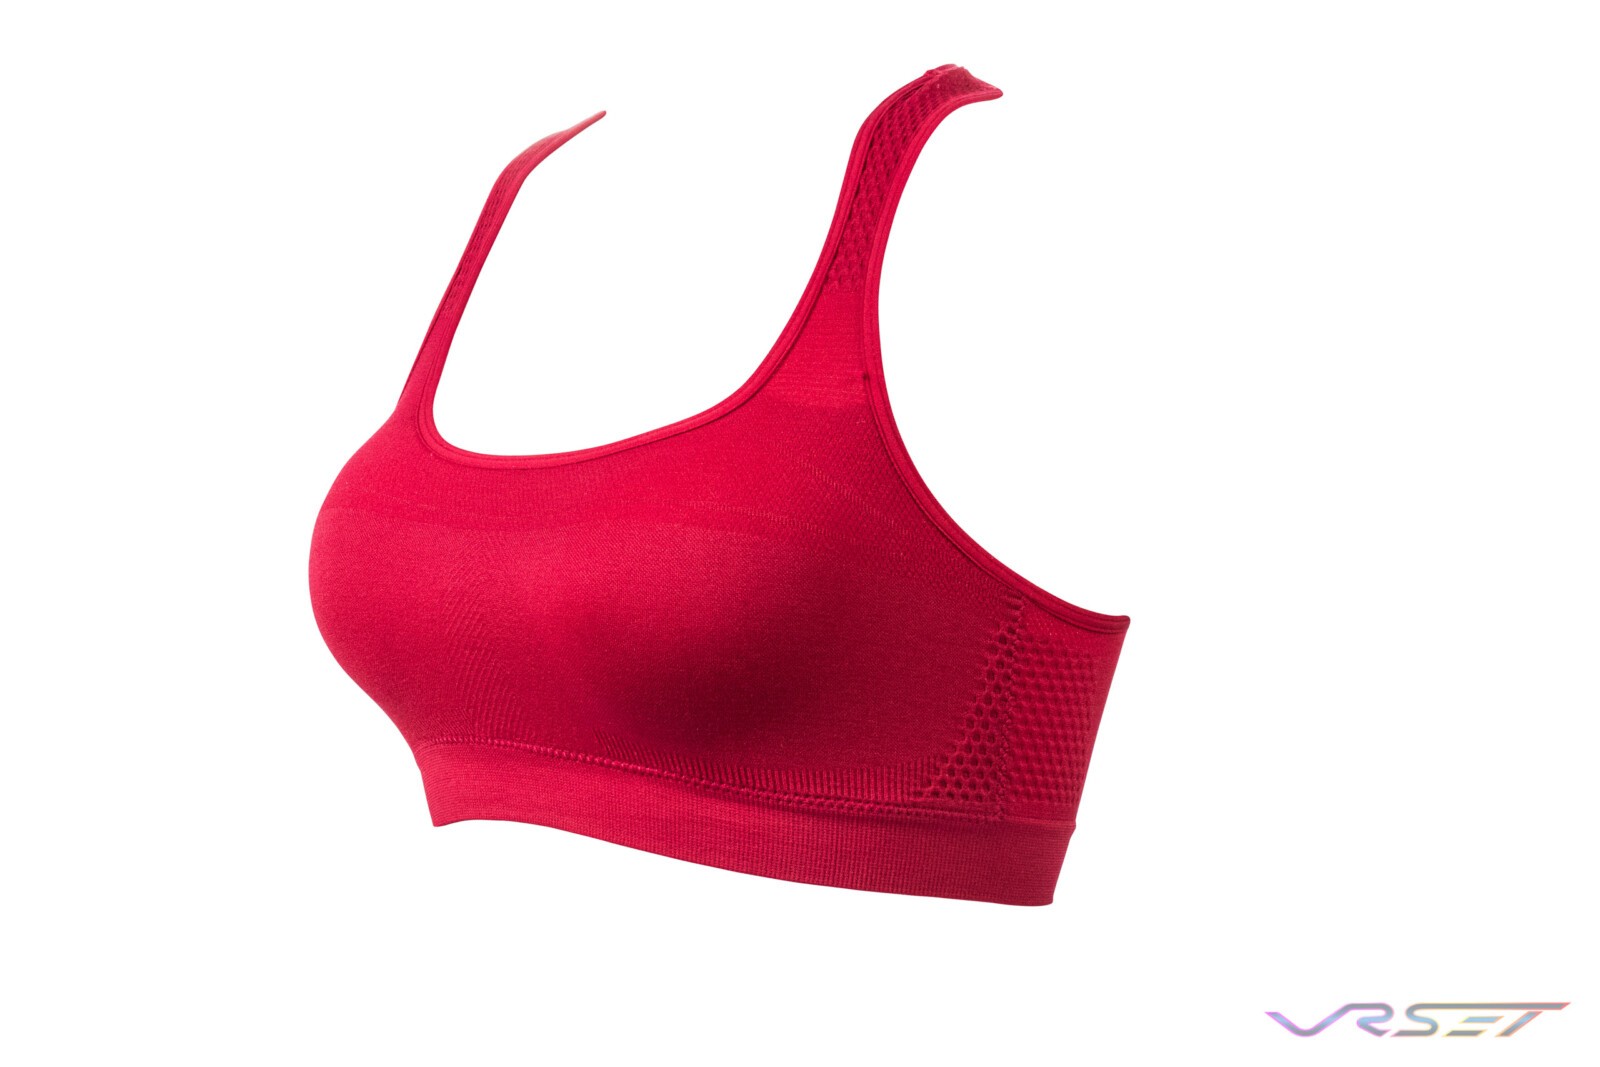 Amazon Shopify eCommerce Red Sports Bra Side Lamour Intimates Invisible Mannequin Photography Los Angeles